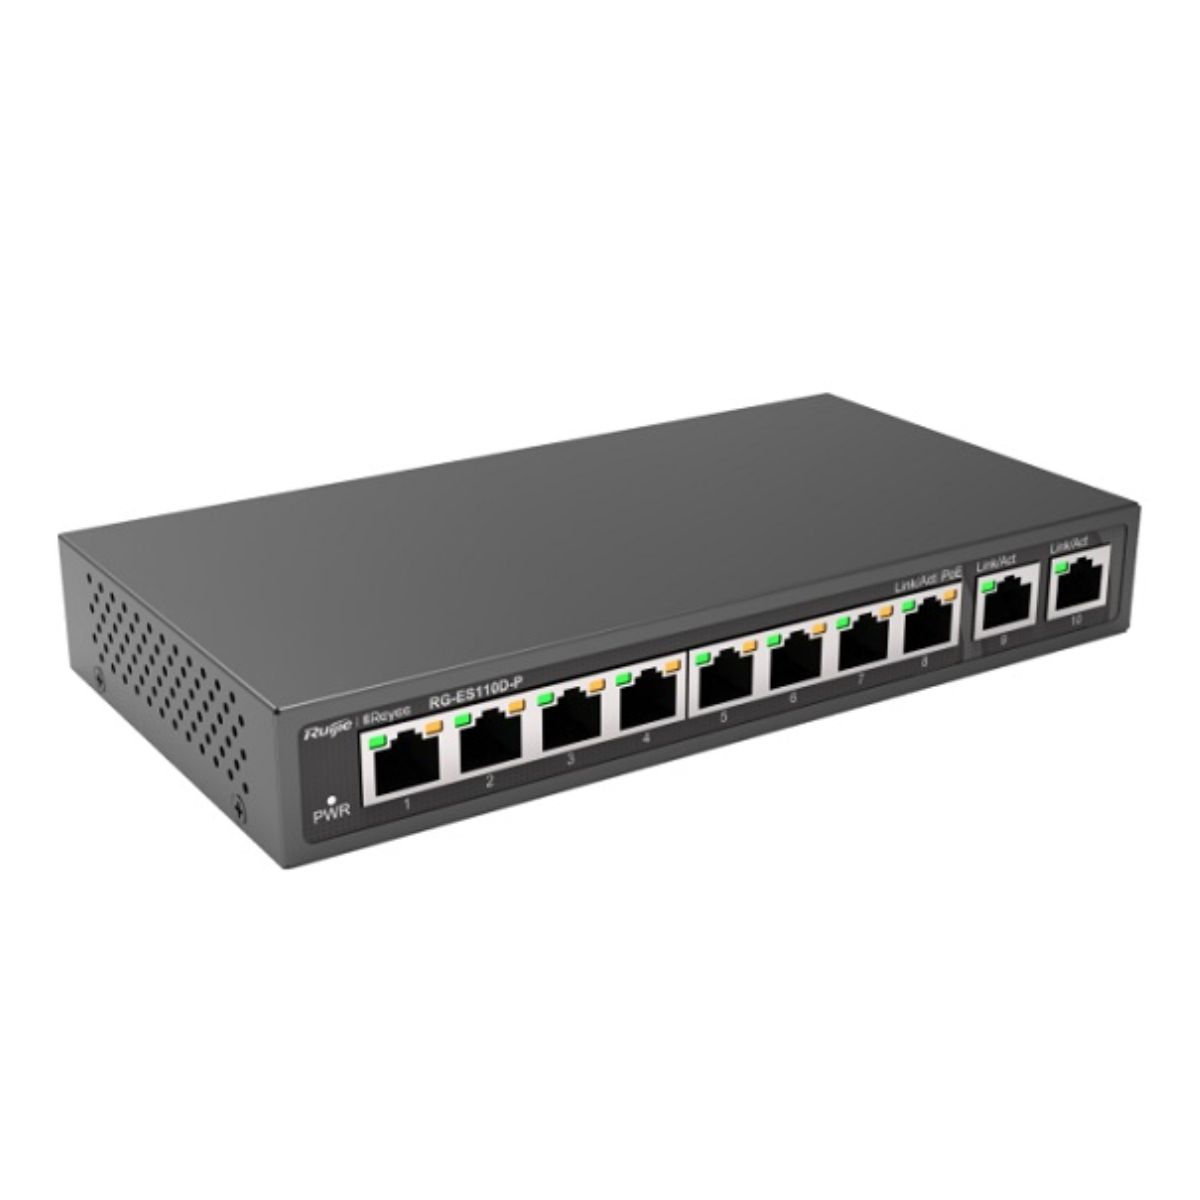  Switch chuyển mạch 10 cổng PoE Ruijie RG-ES110D-P 8 cổng10/100Mbps PoE, 2 cổng 10/100/1000Mbps 